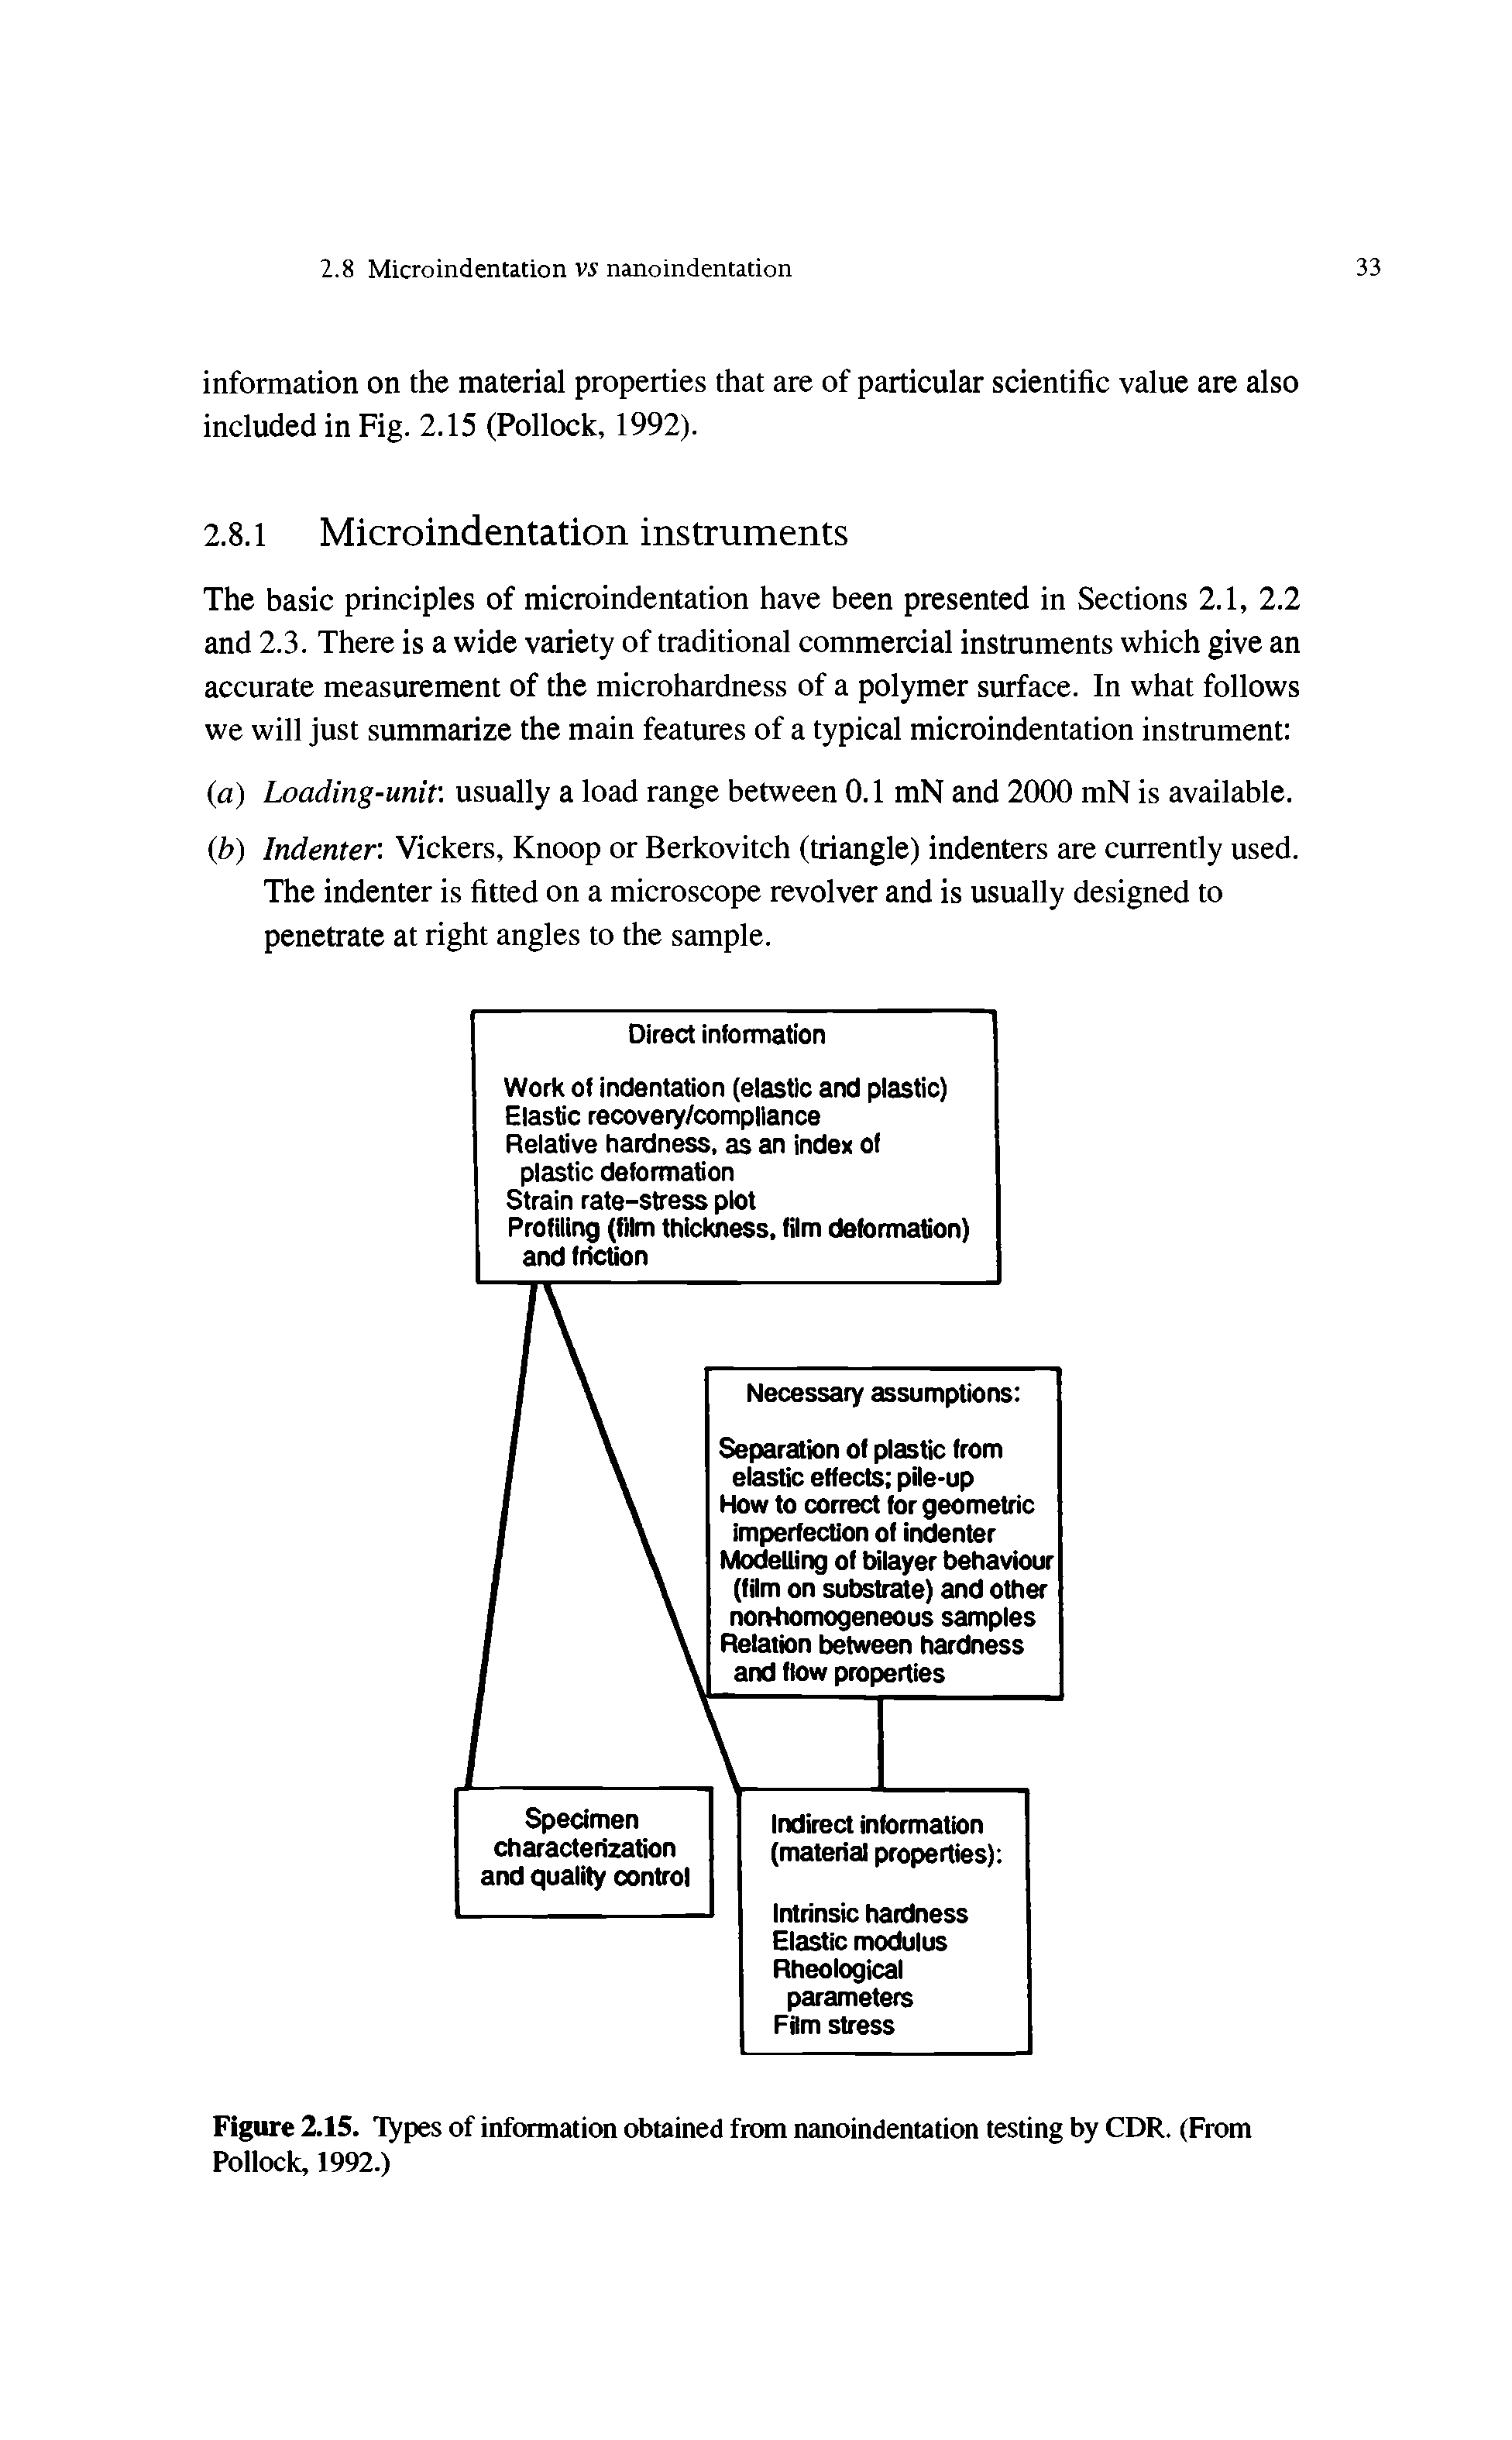 Figure 2.15. Types of information obtained from nanoindentation testing by CDR. (From Pollock, 1992.)...